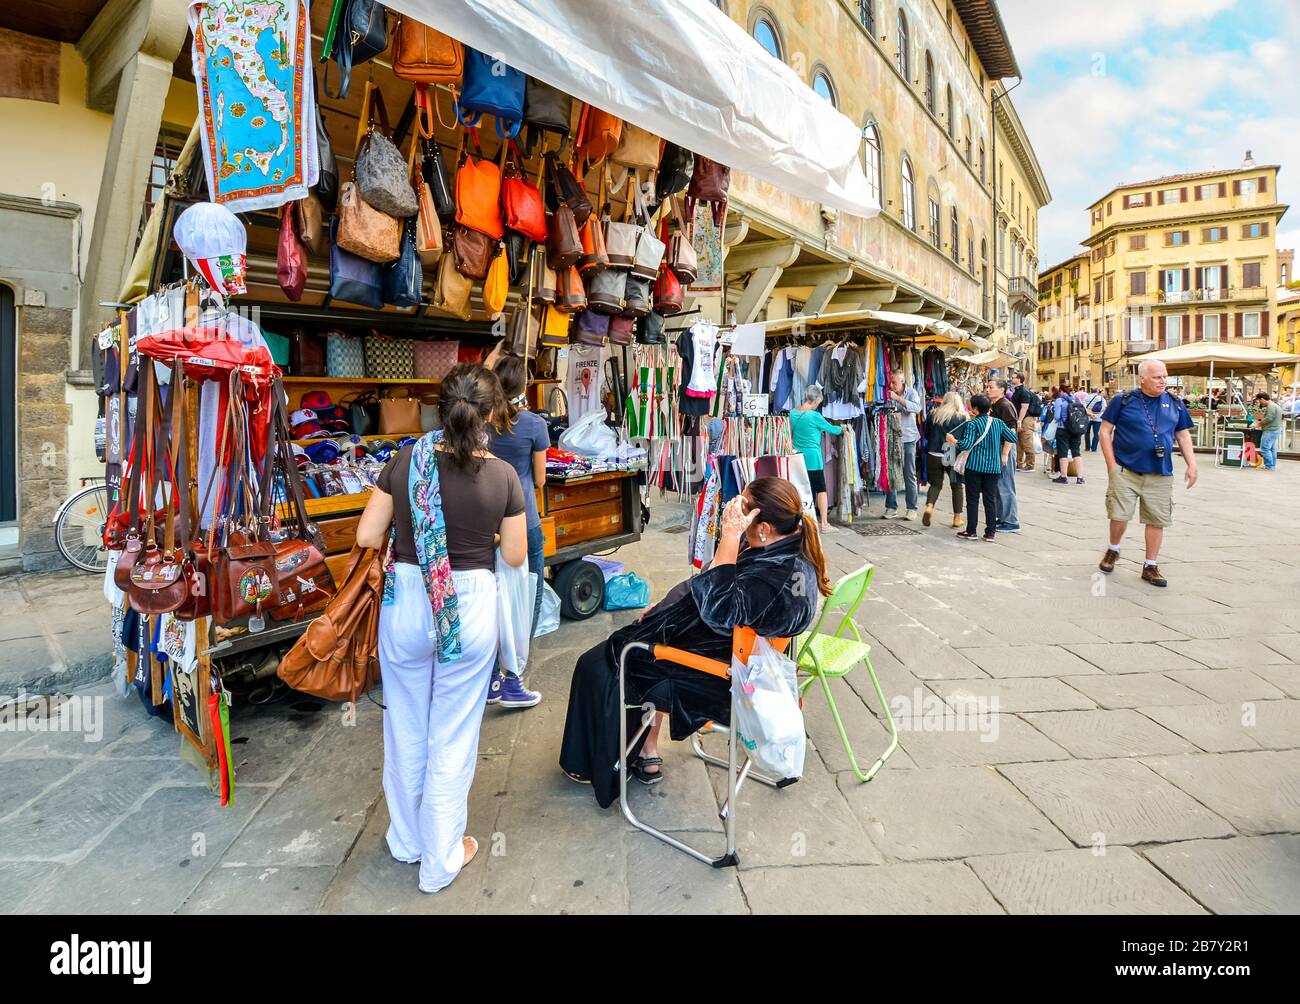 A female tourist buys souvenirs from a small shop stand selling leather goods and clothing in Piazza Santa Croce in Florence Italy Stock Photo